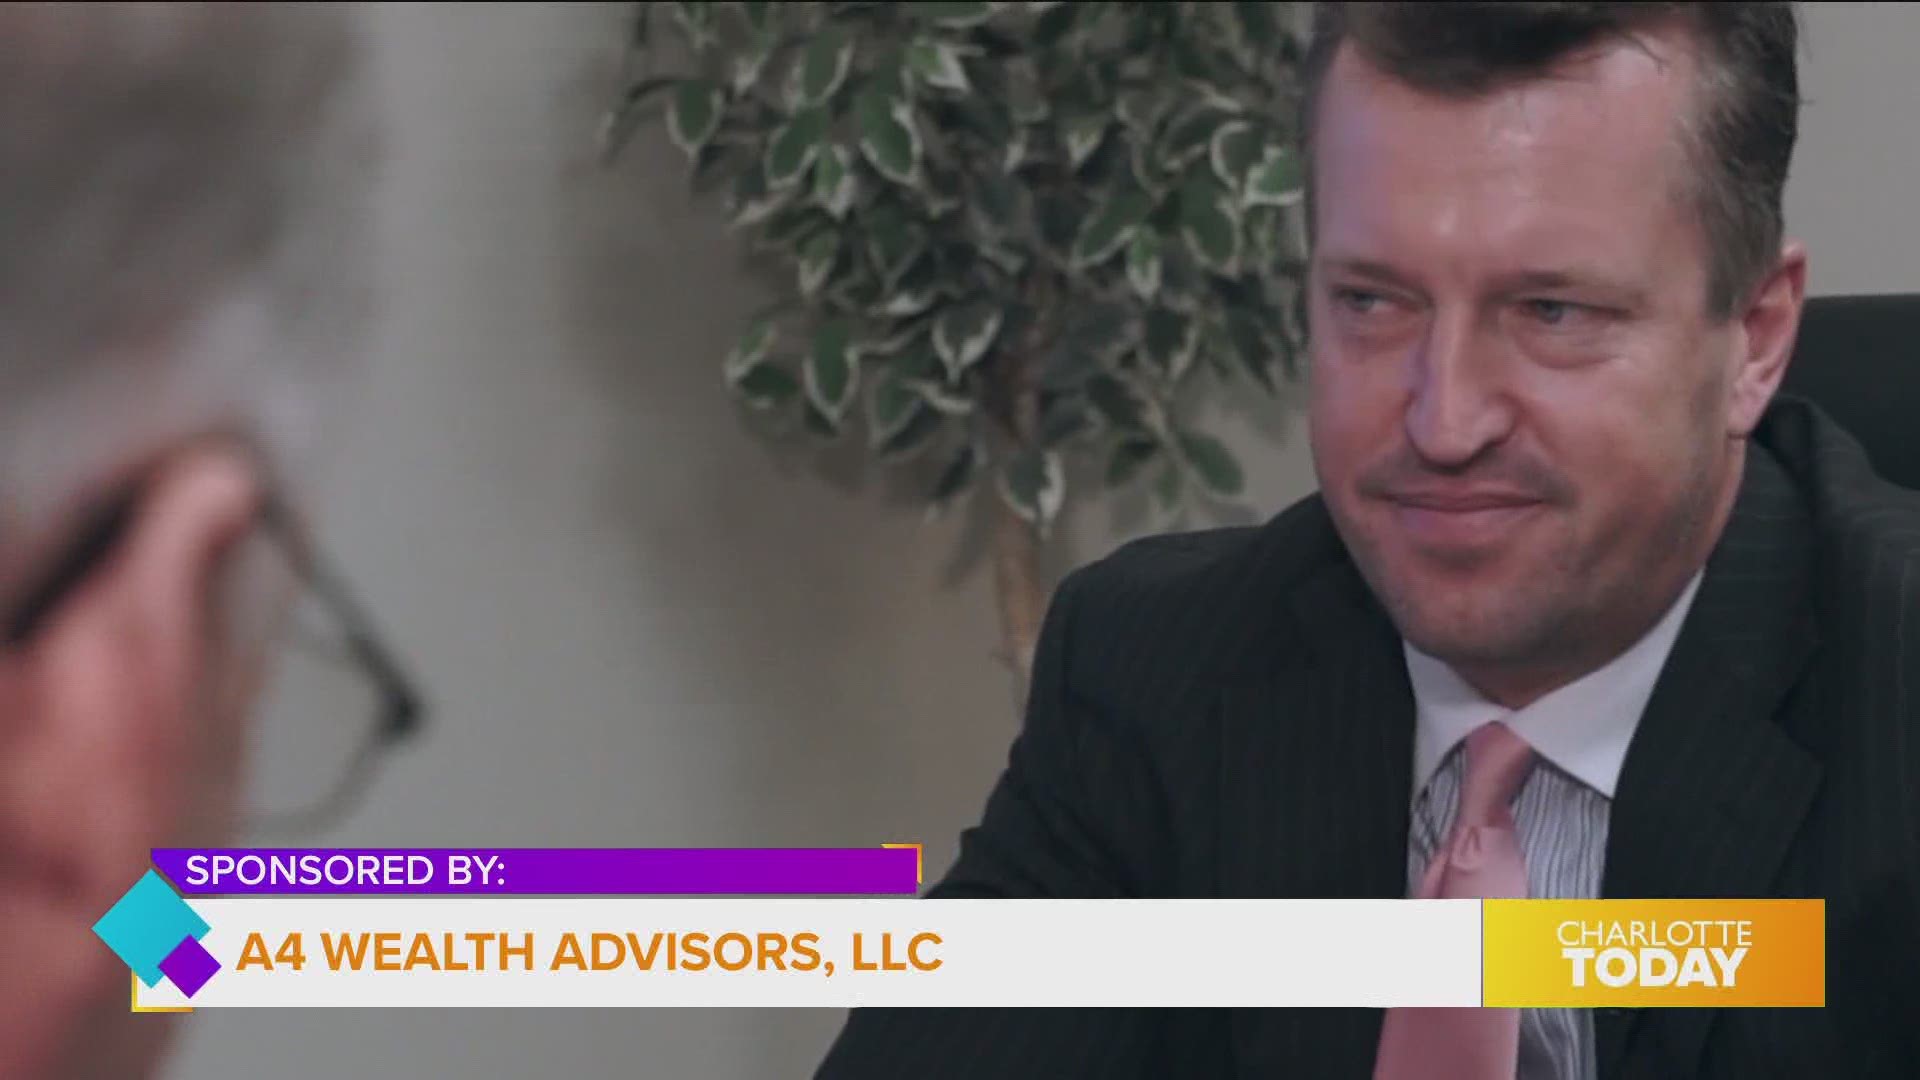 A4 Wealth Advisors talks about the market and the potential impact in an election year